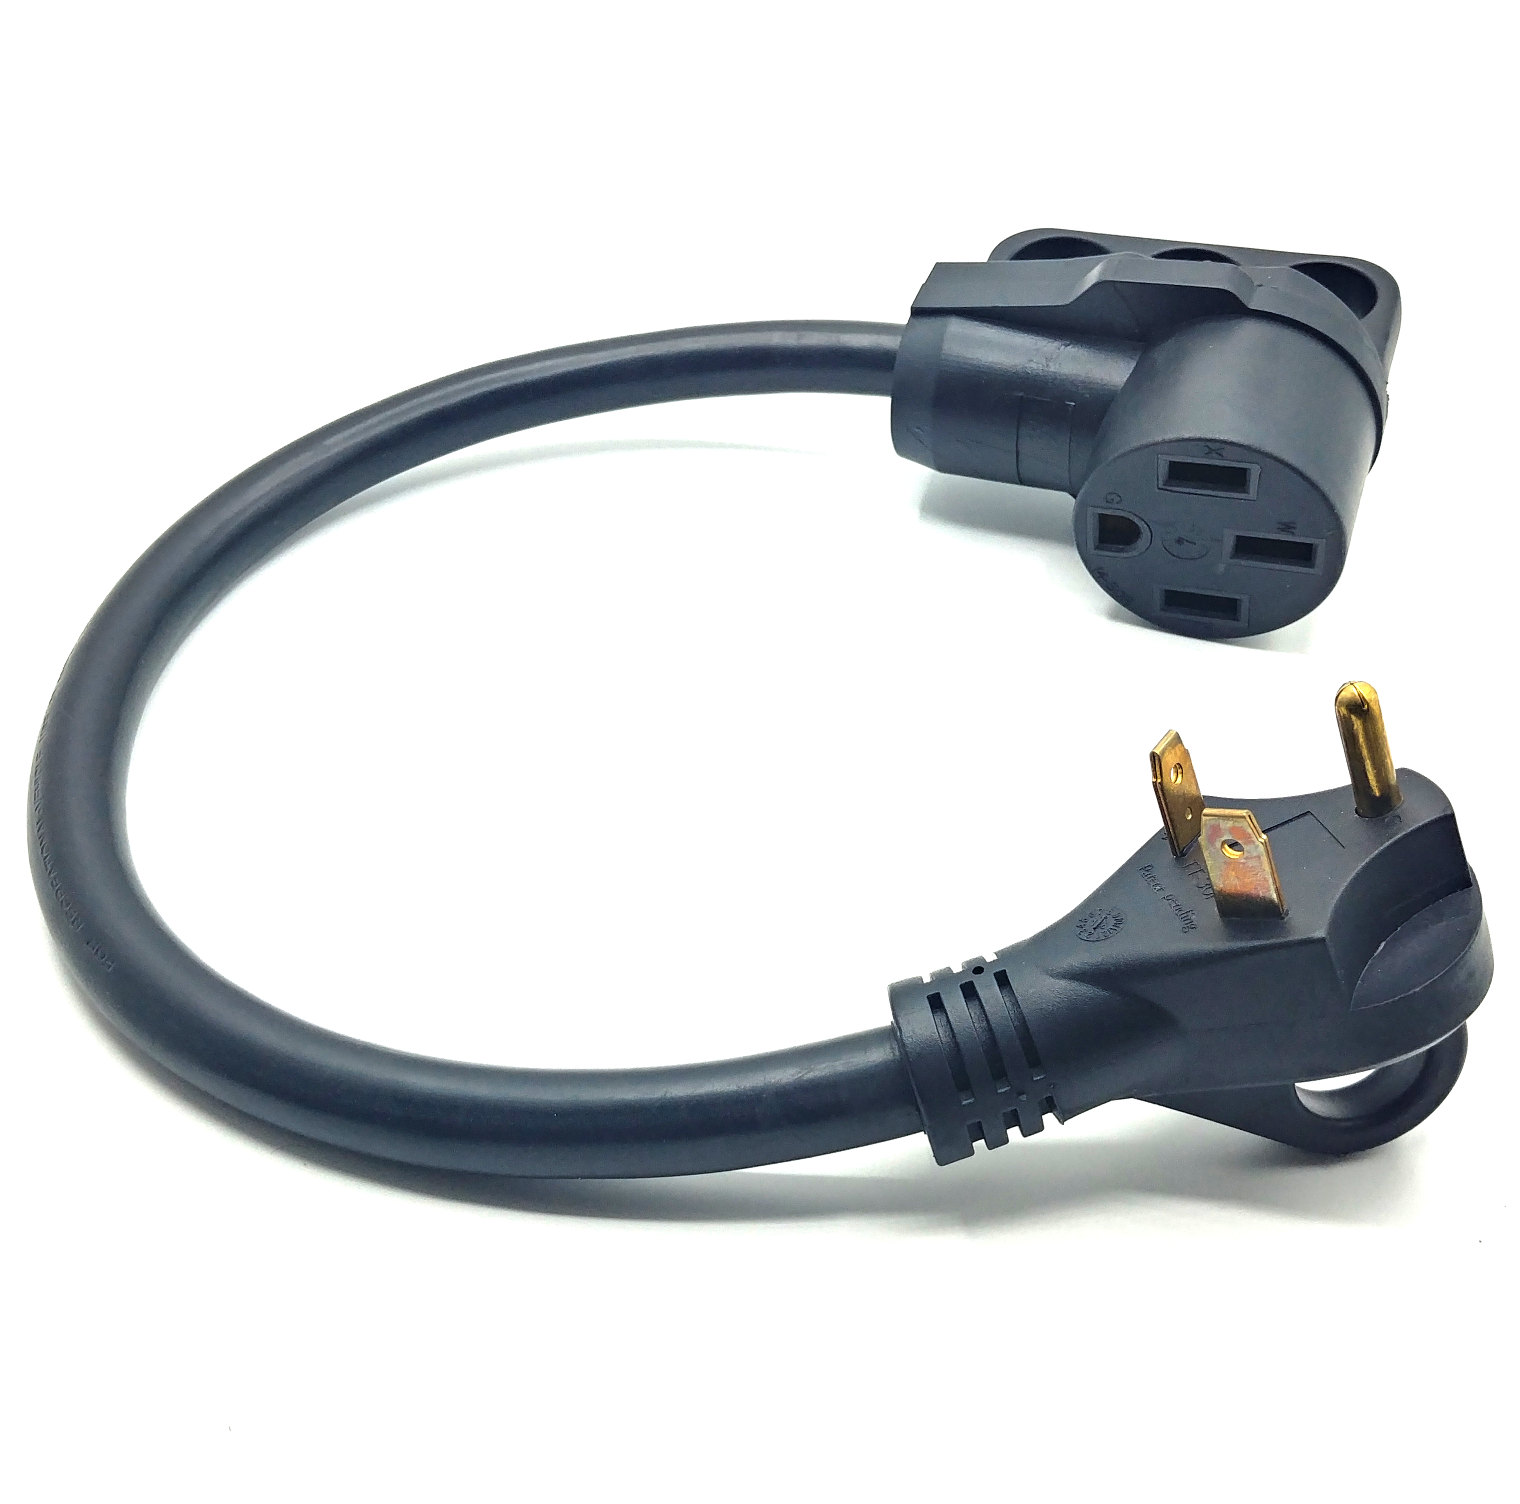 NEMA 10-50P to 14-50R Adapter for EV Charging Only 10 ft. 